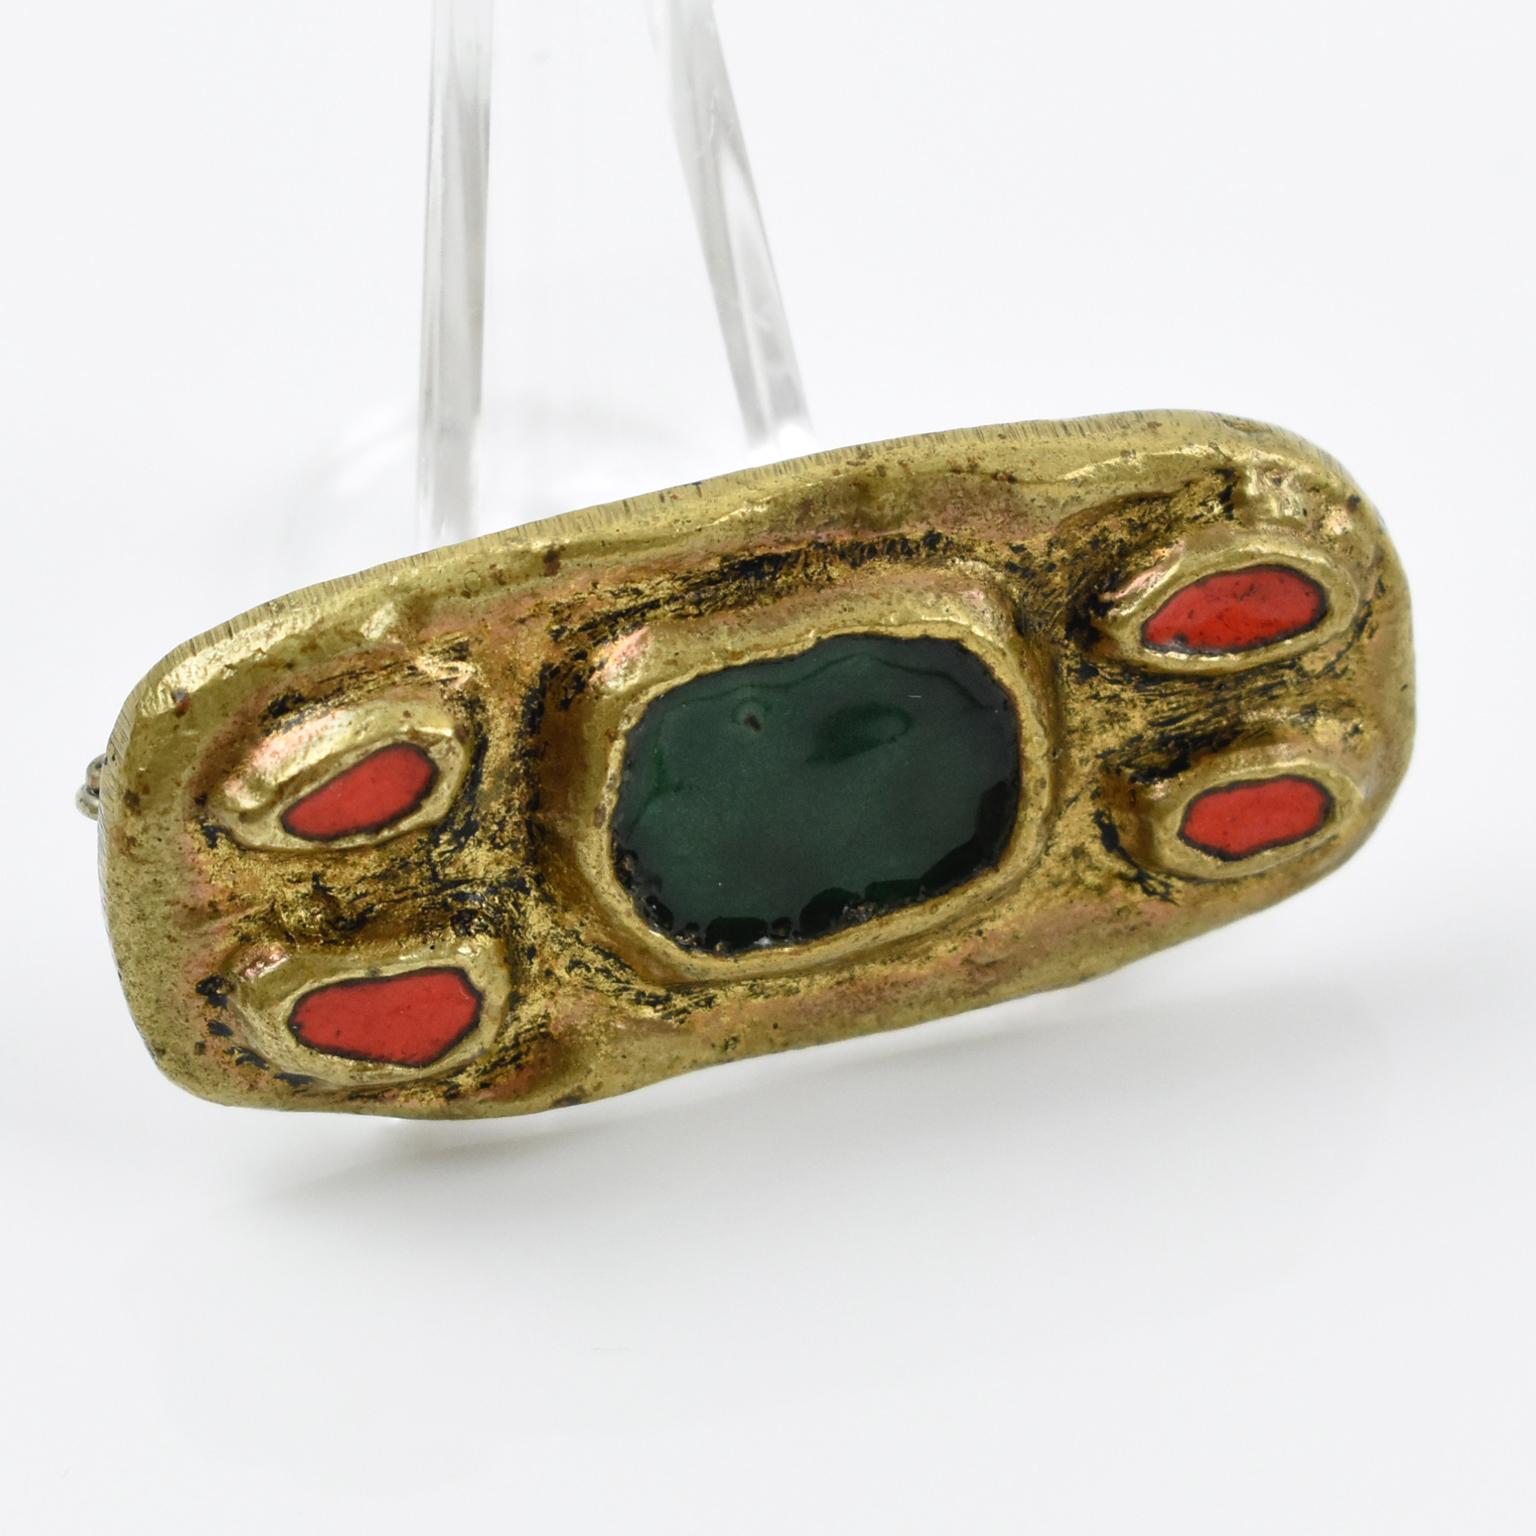 Modernist French Artist Willy Gilt Bronze and Enamel Pin Brooch, 1950s For Sale